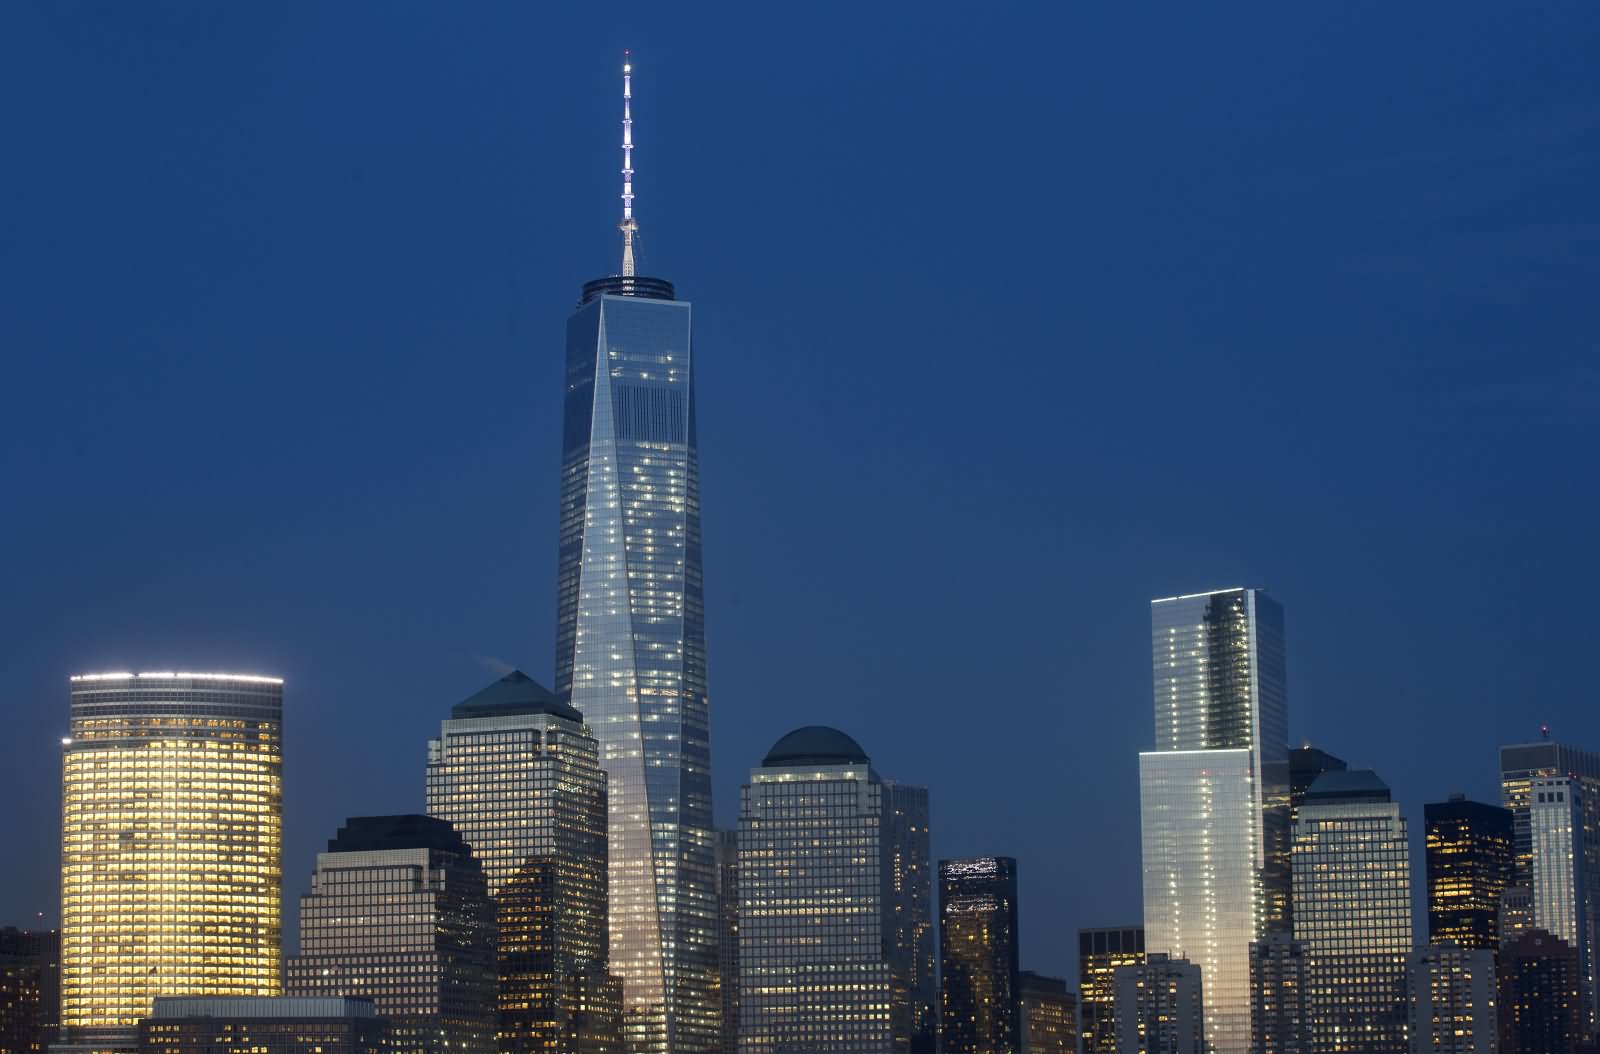 Night View Of One World Trade Center